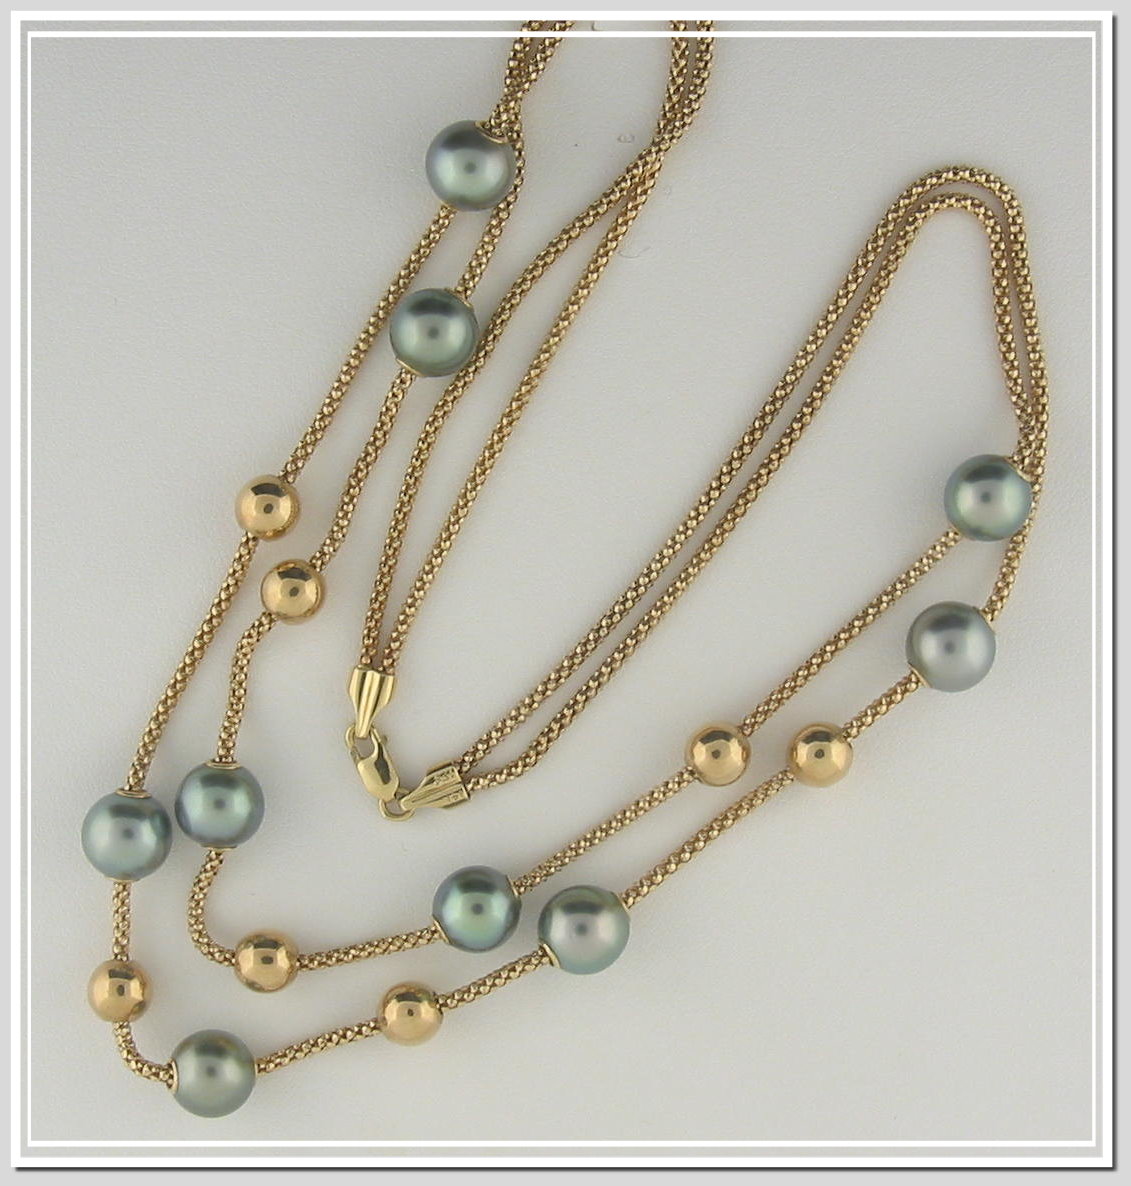 2 Strand Mov-A-Pearl Tin Cup Necklace 8.2-8.6MM Gray/Blue Tahitian Pearls 14K Yellow Gold 17+18In. 